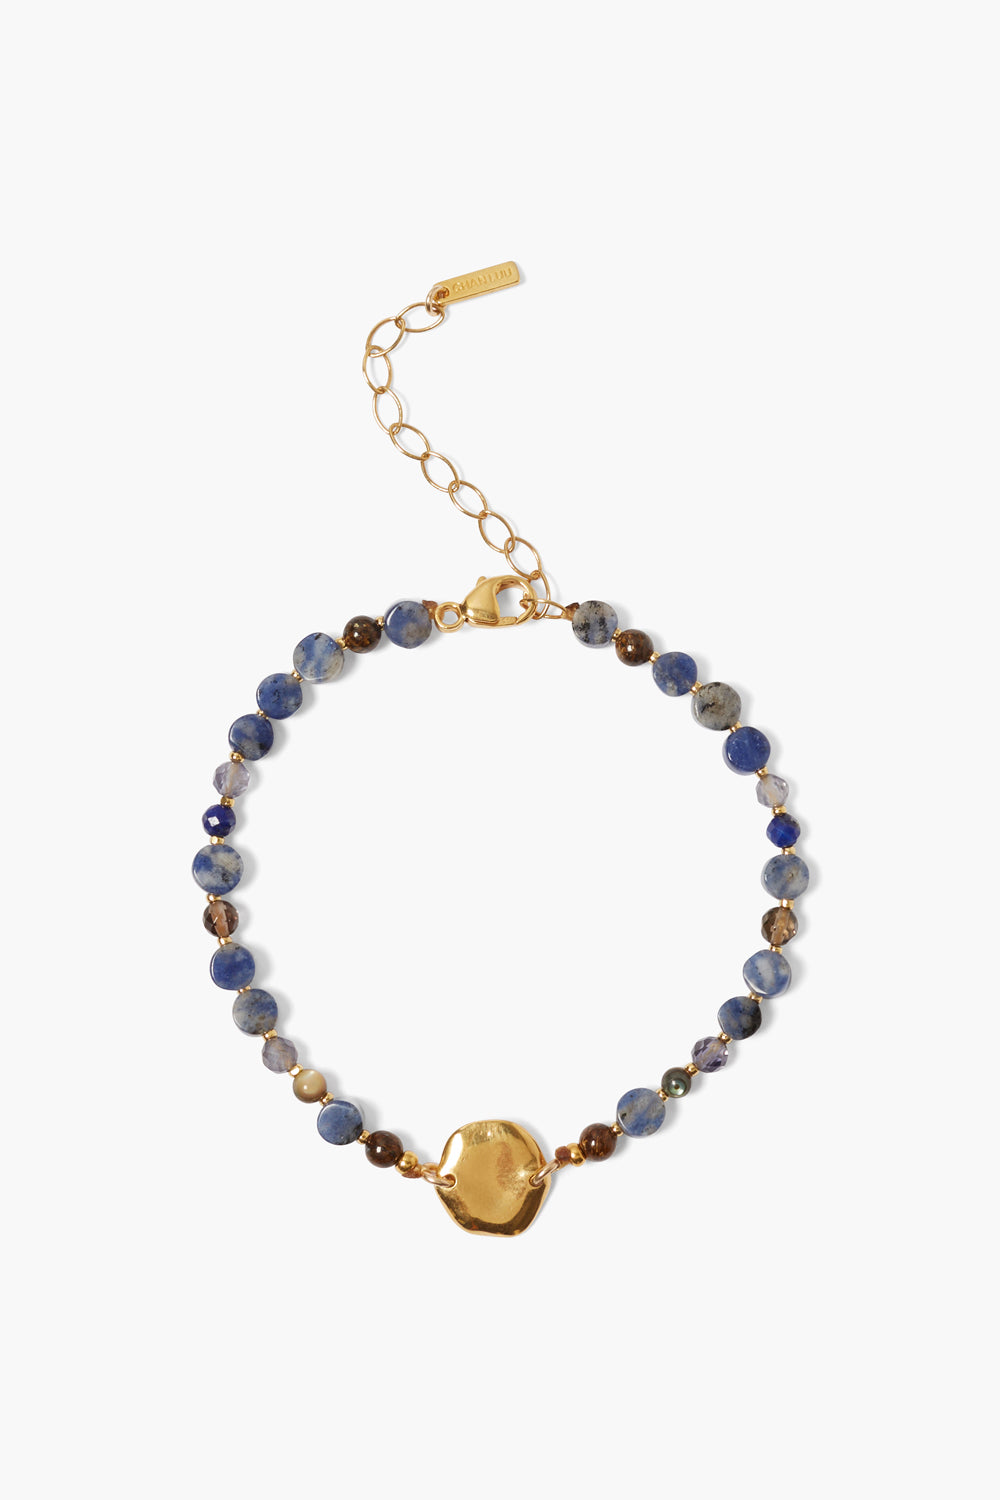 GOLD PLATED STERLING SILVER BRACELET-SODALITE MIX - Kingfisher Road - Online Boutique